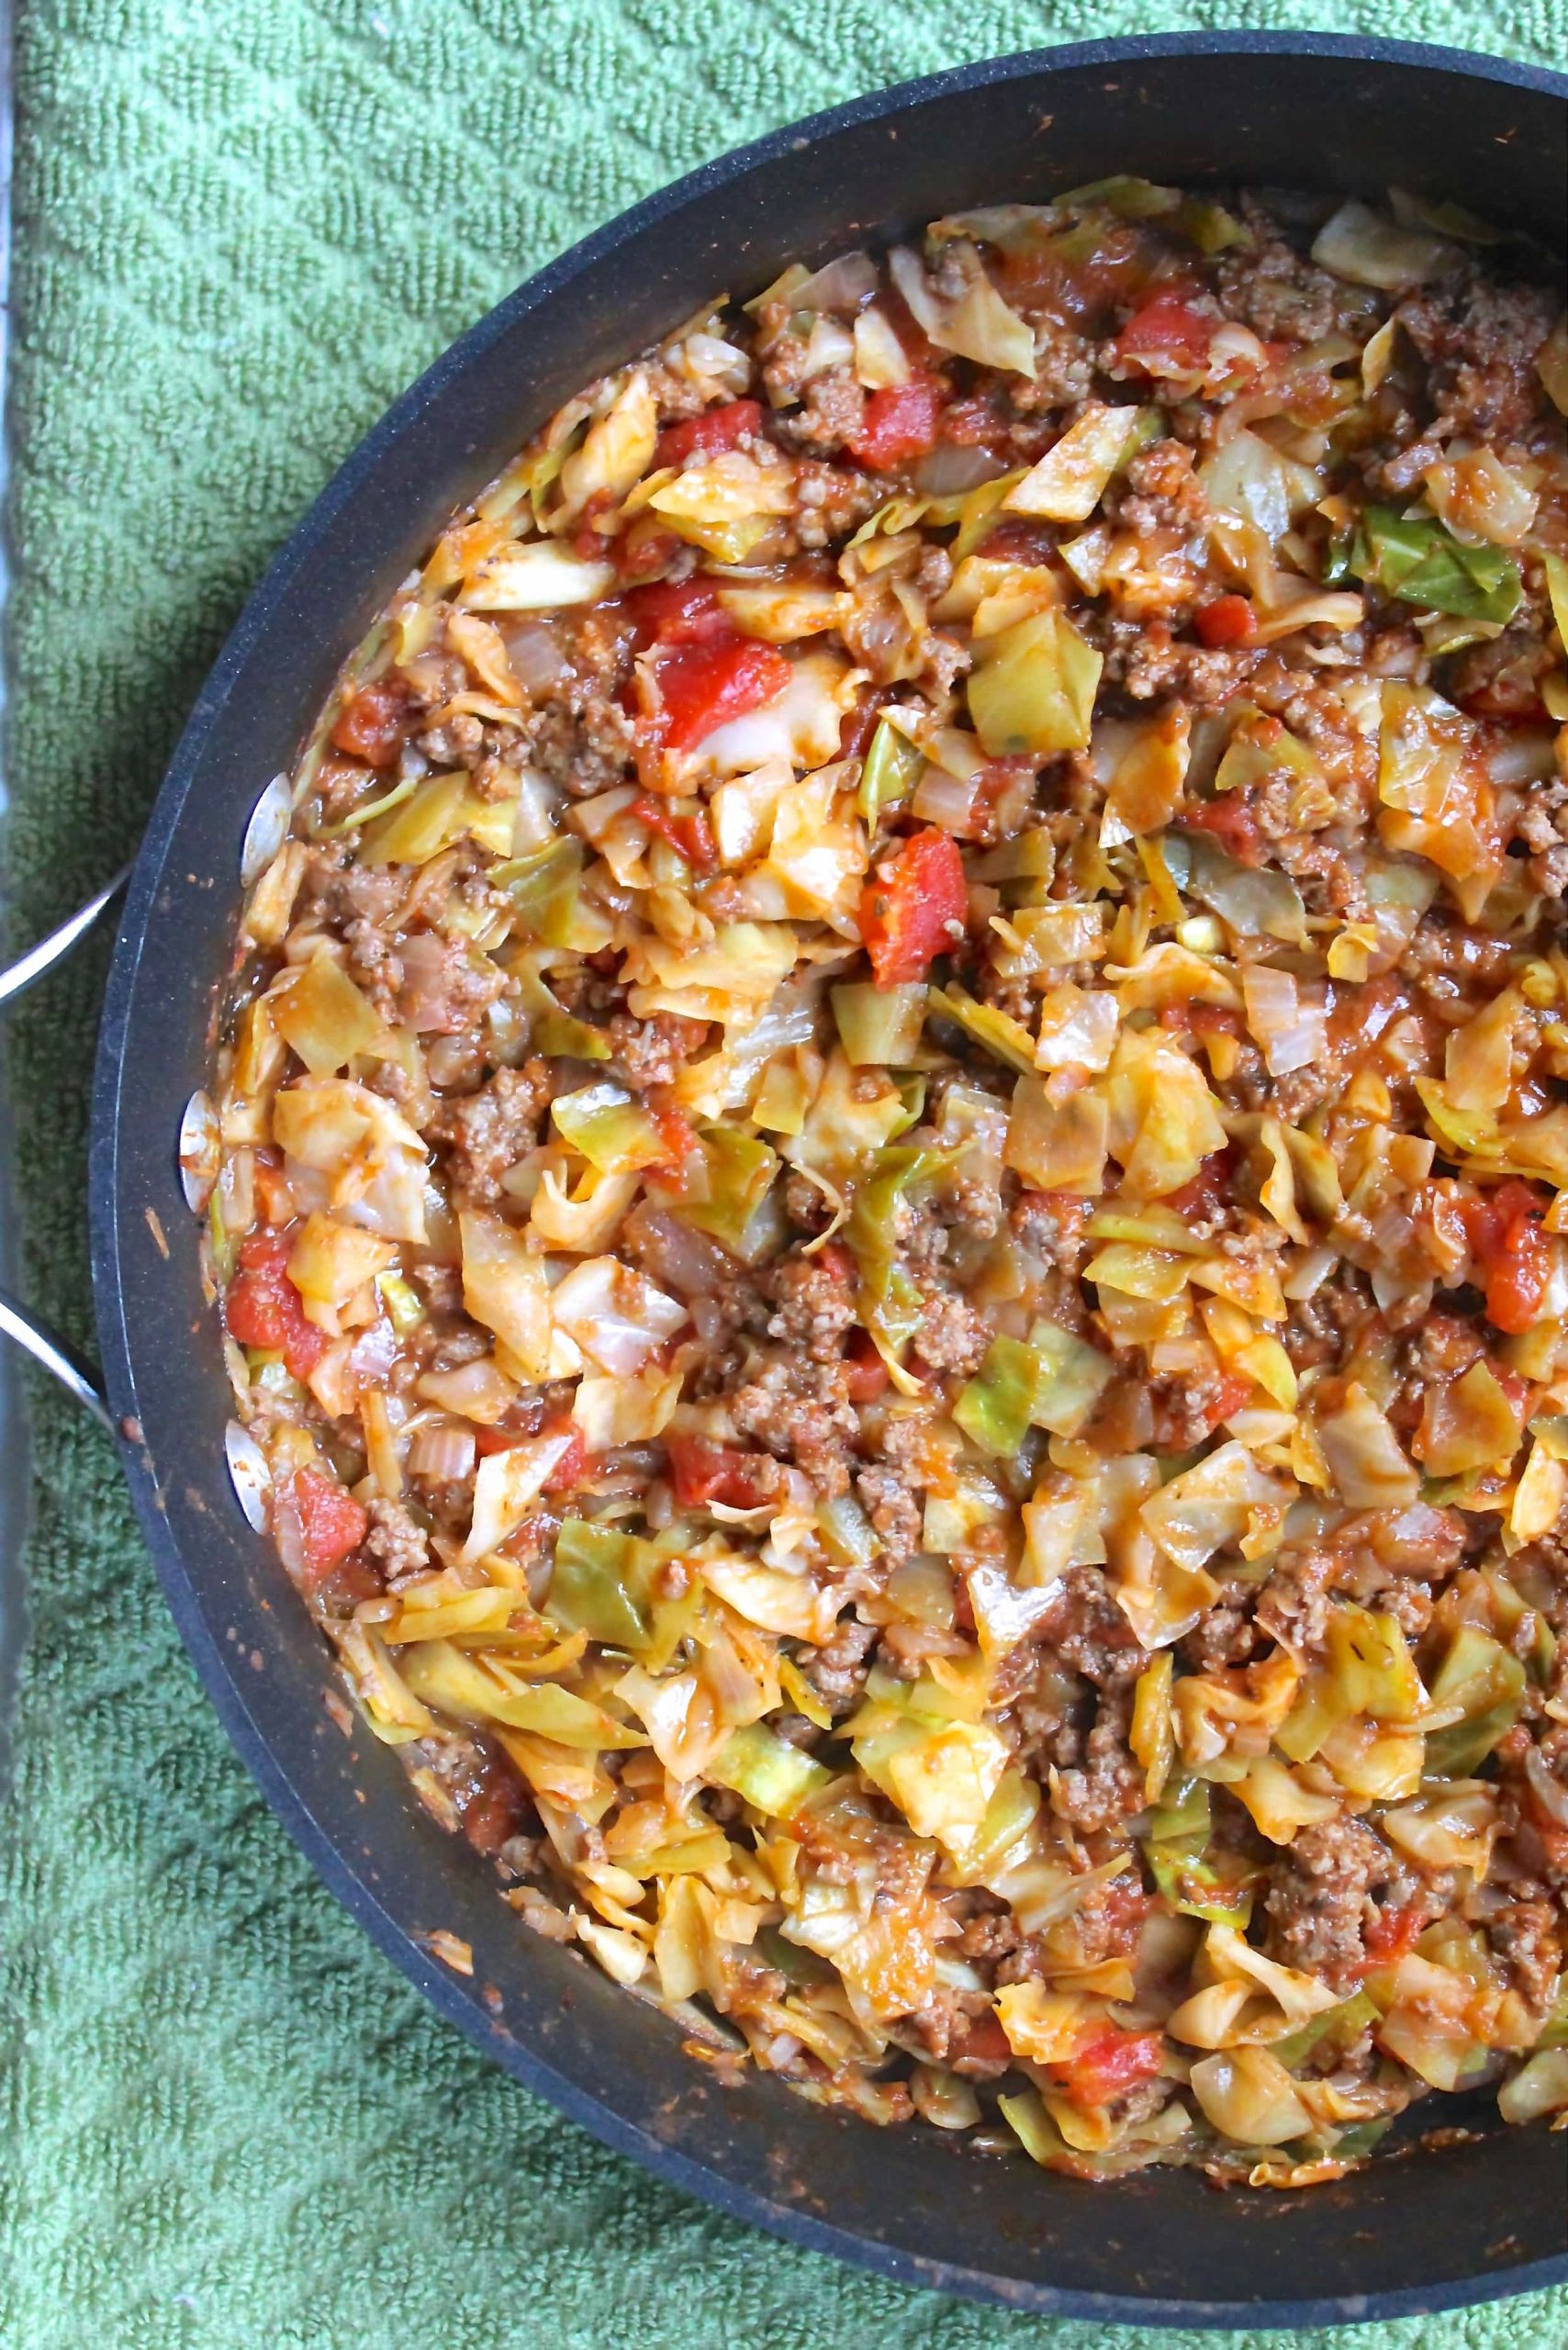 Top 21 Ground Beef and Cabbage - Best Recipes Ideas and Collections